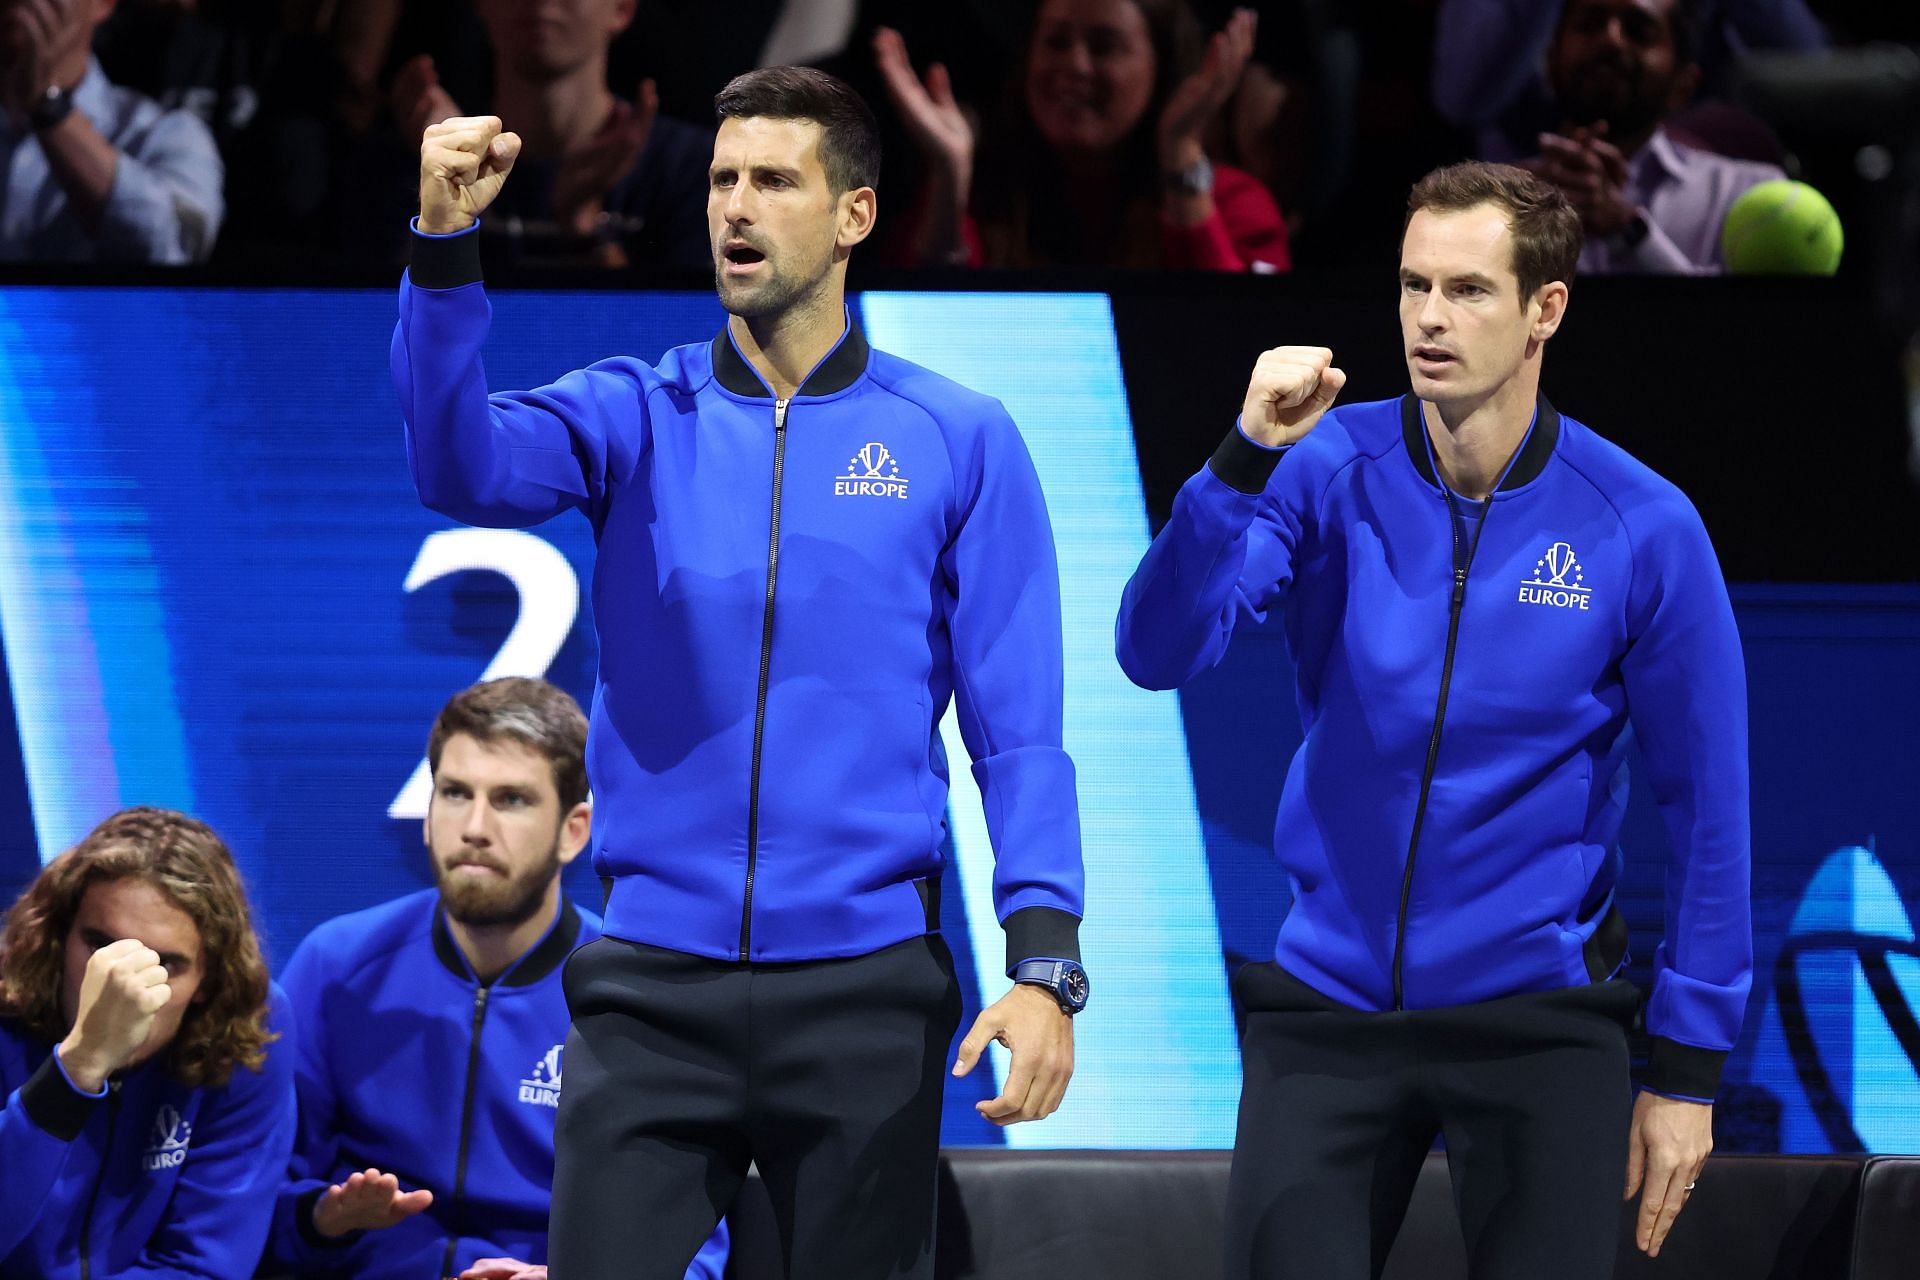 Novak Djokovic and Andy Murray have not faced each other since 2017.